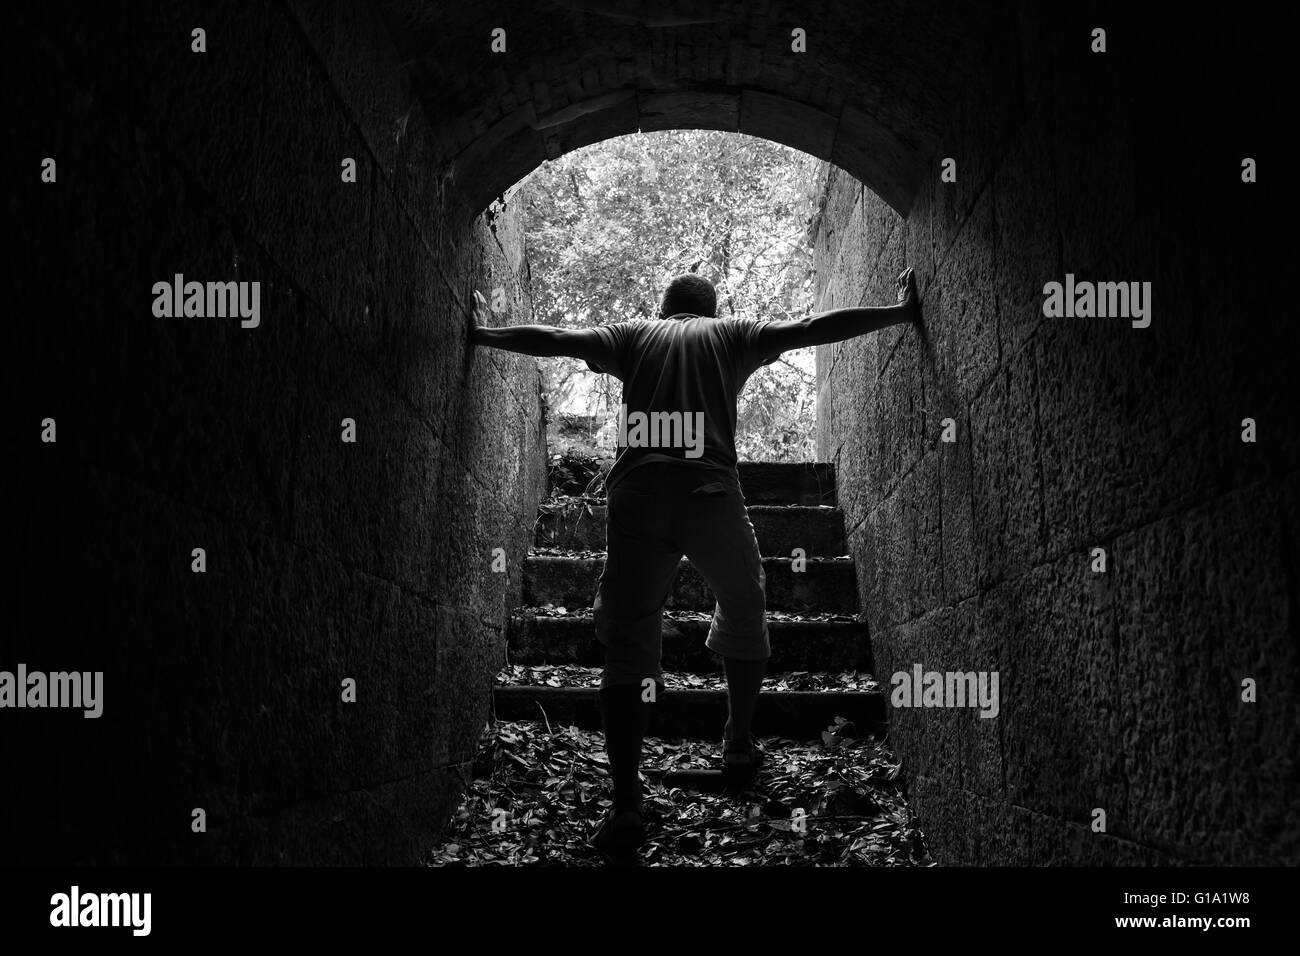 Tired man goes out of dark stone tunnel with glowing end, monochrome photo Stock Photo